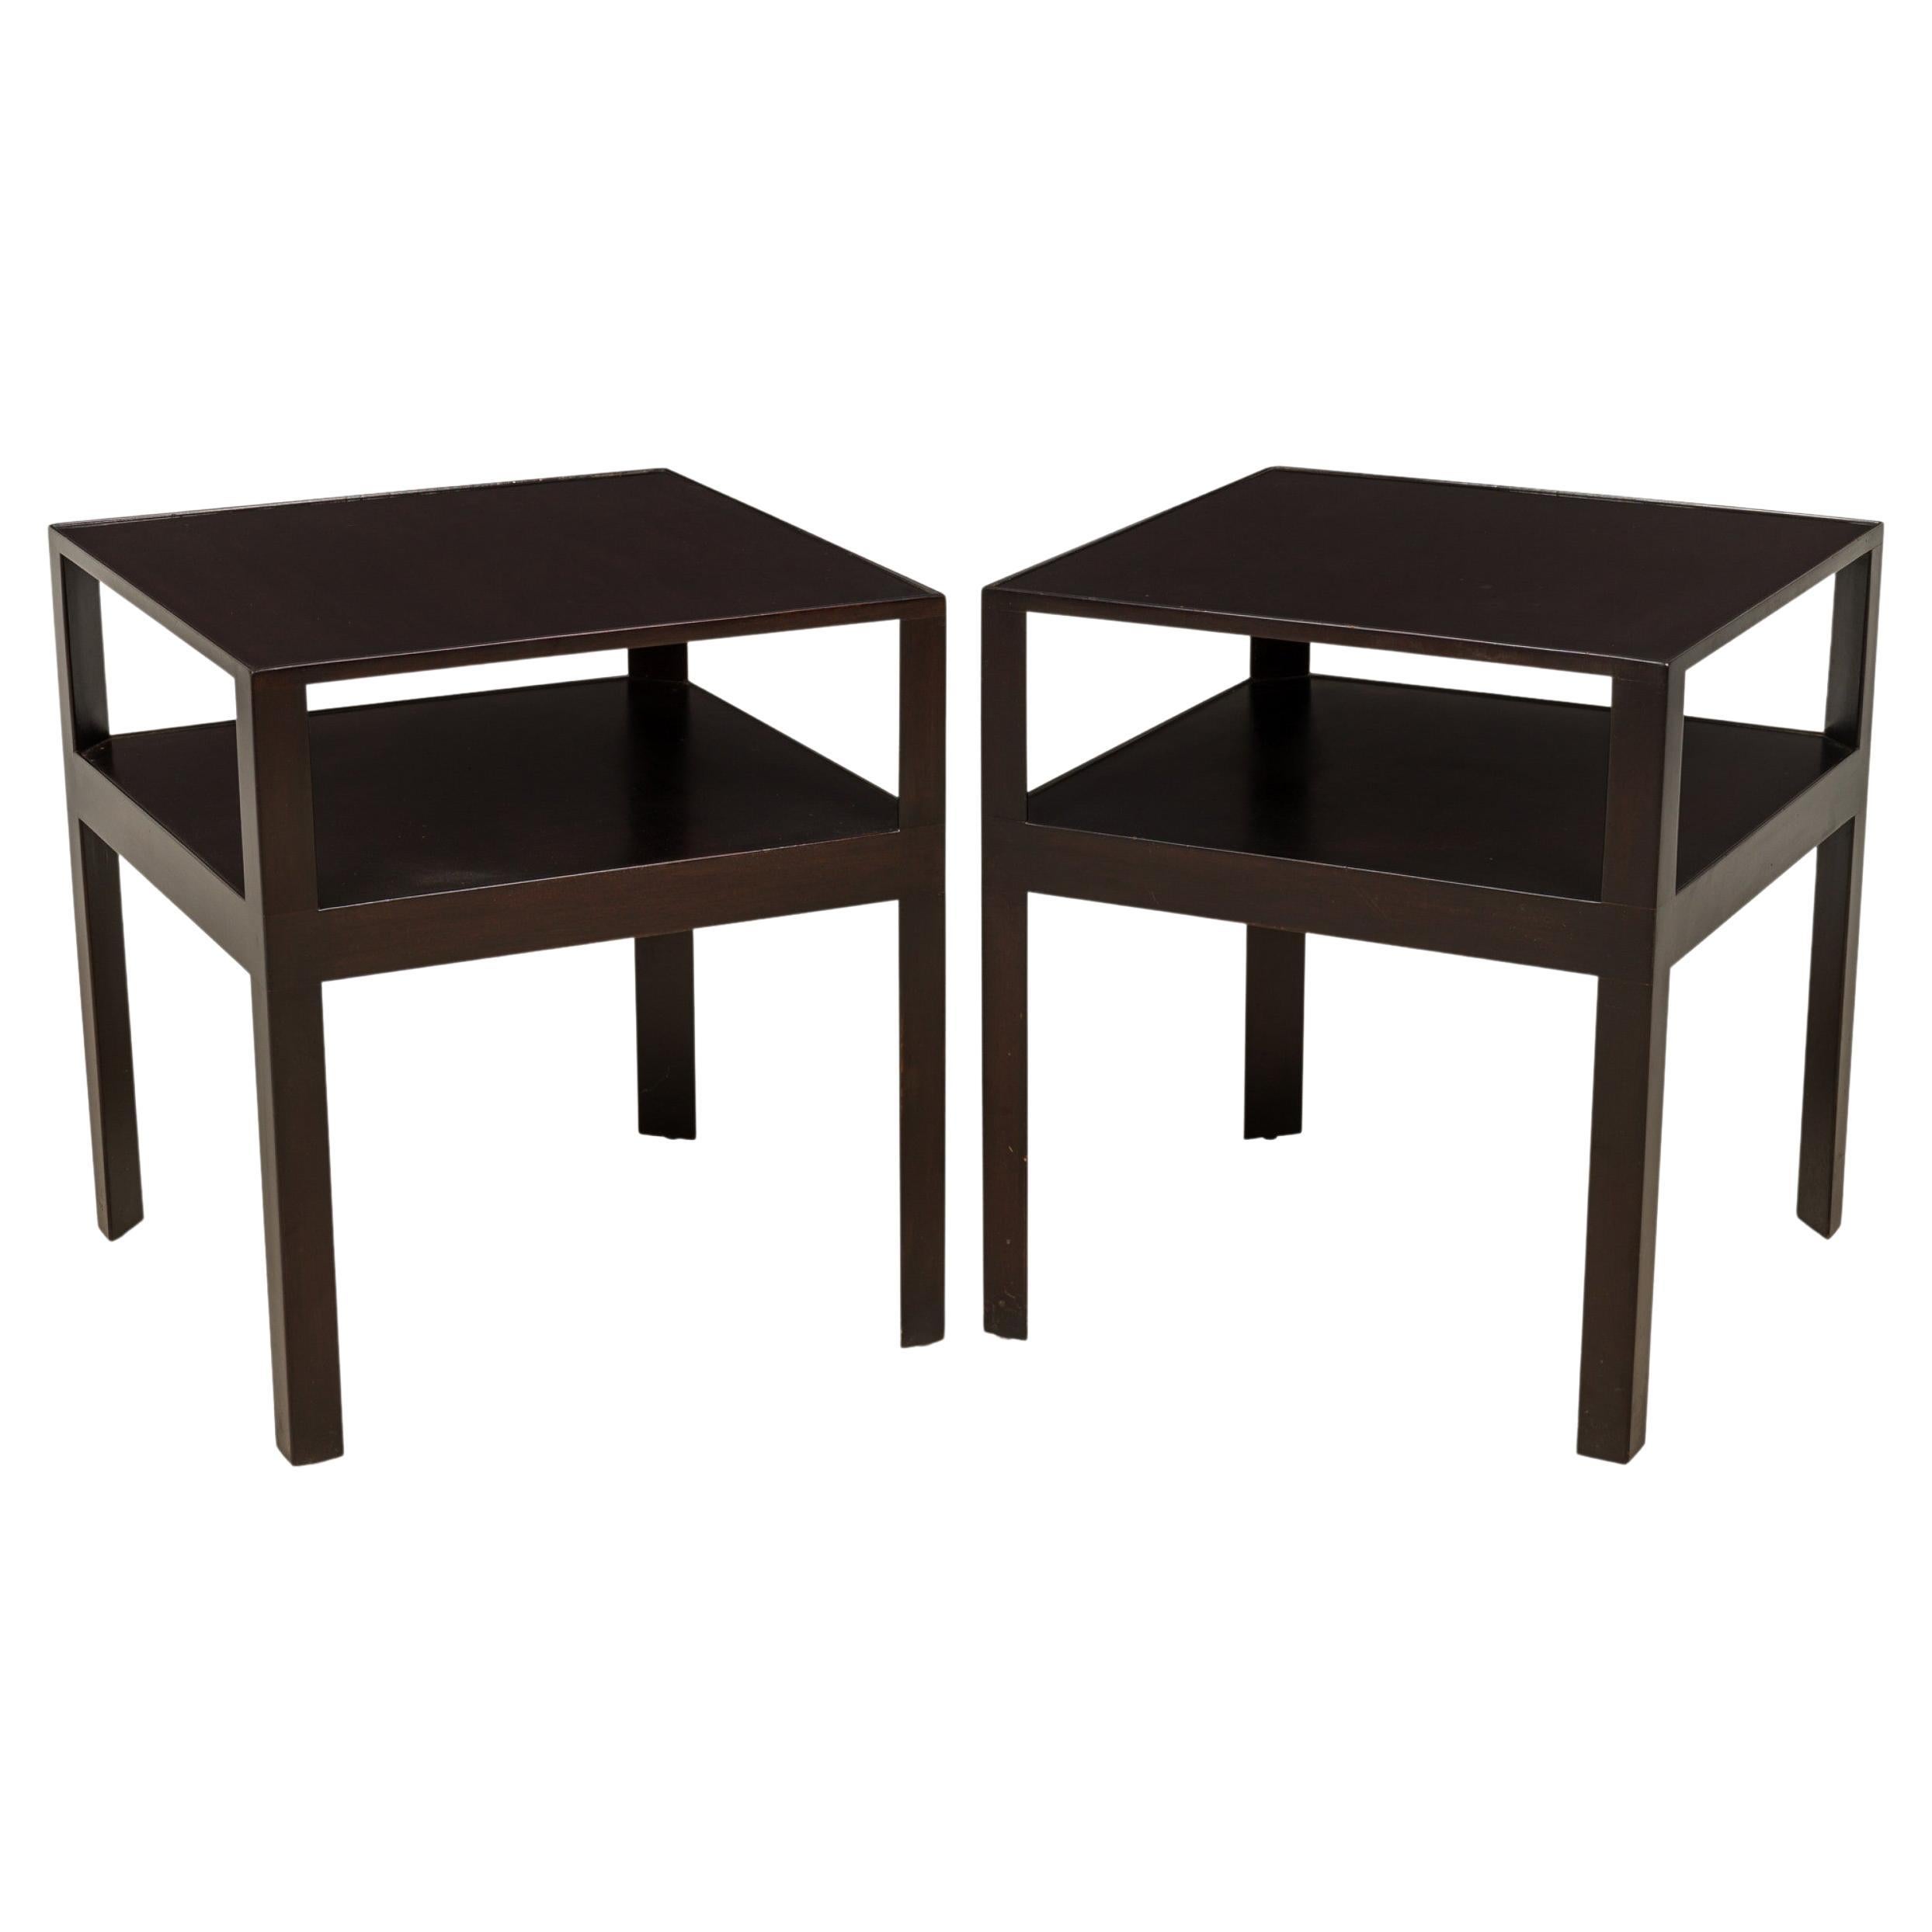 Pair of Edward Wormley Lacquered Dark Wood Two Shelf End / Side Tables